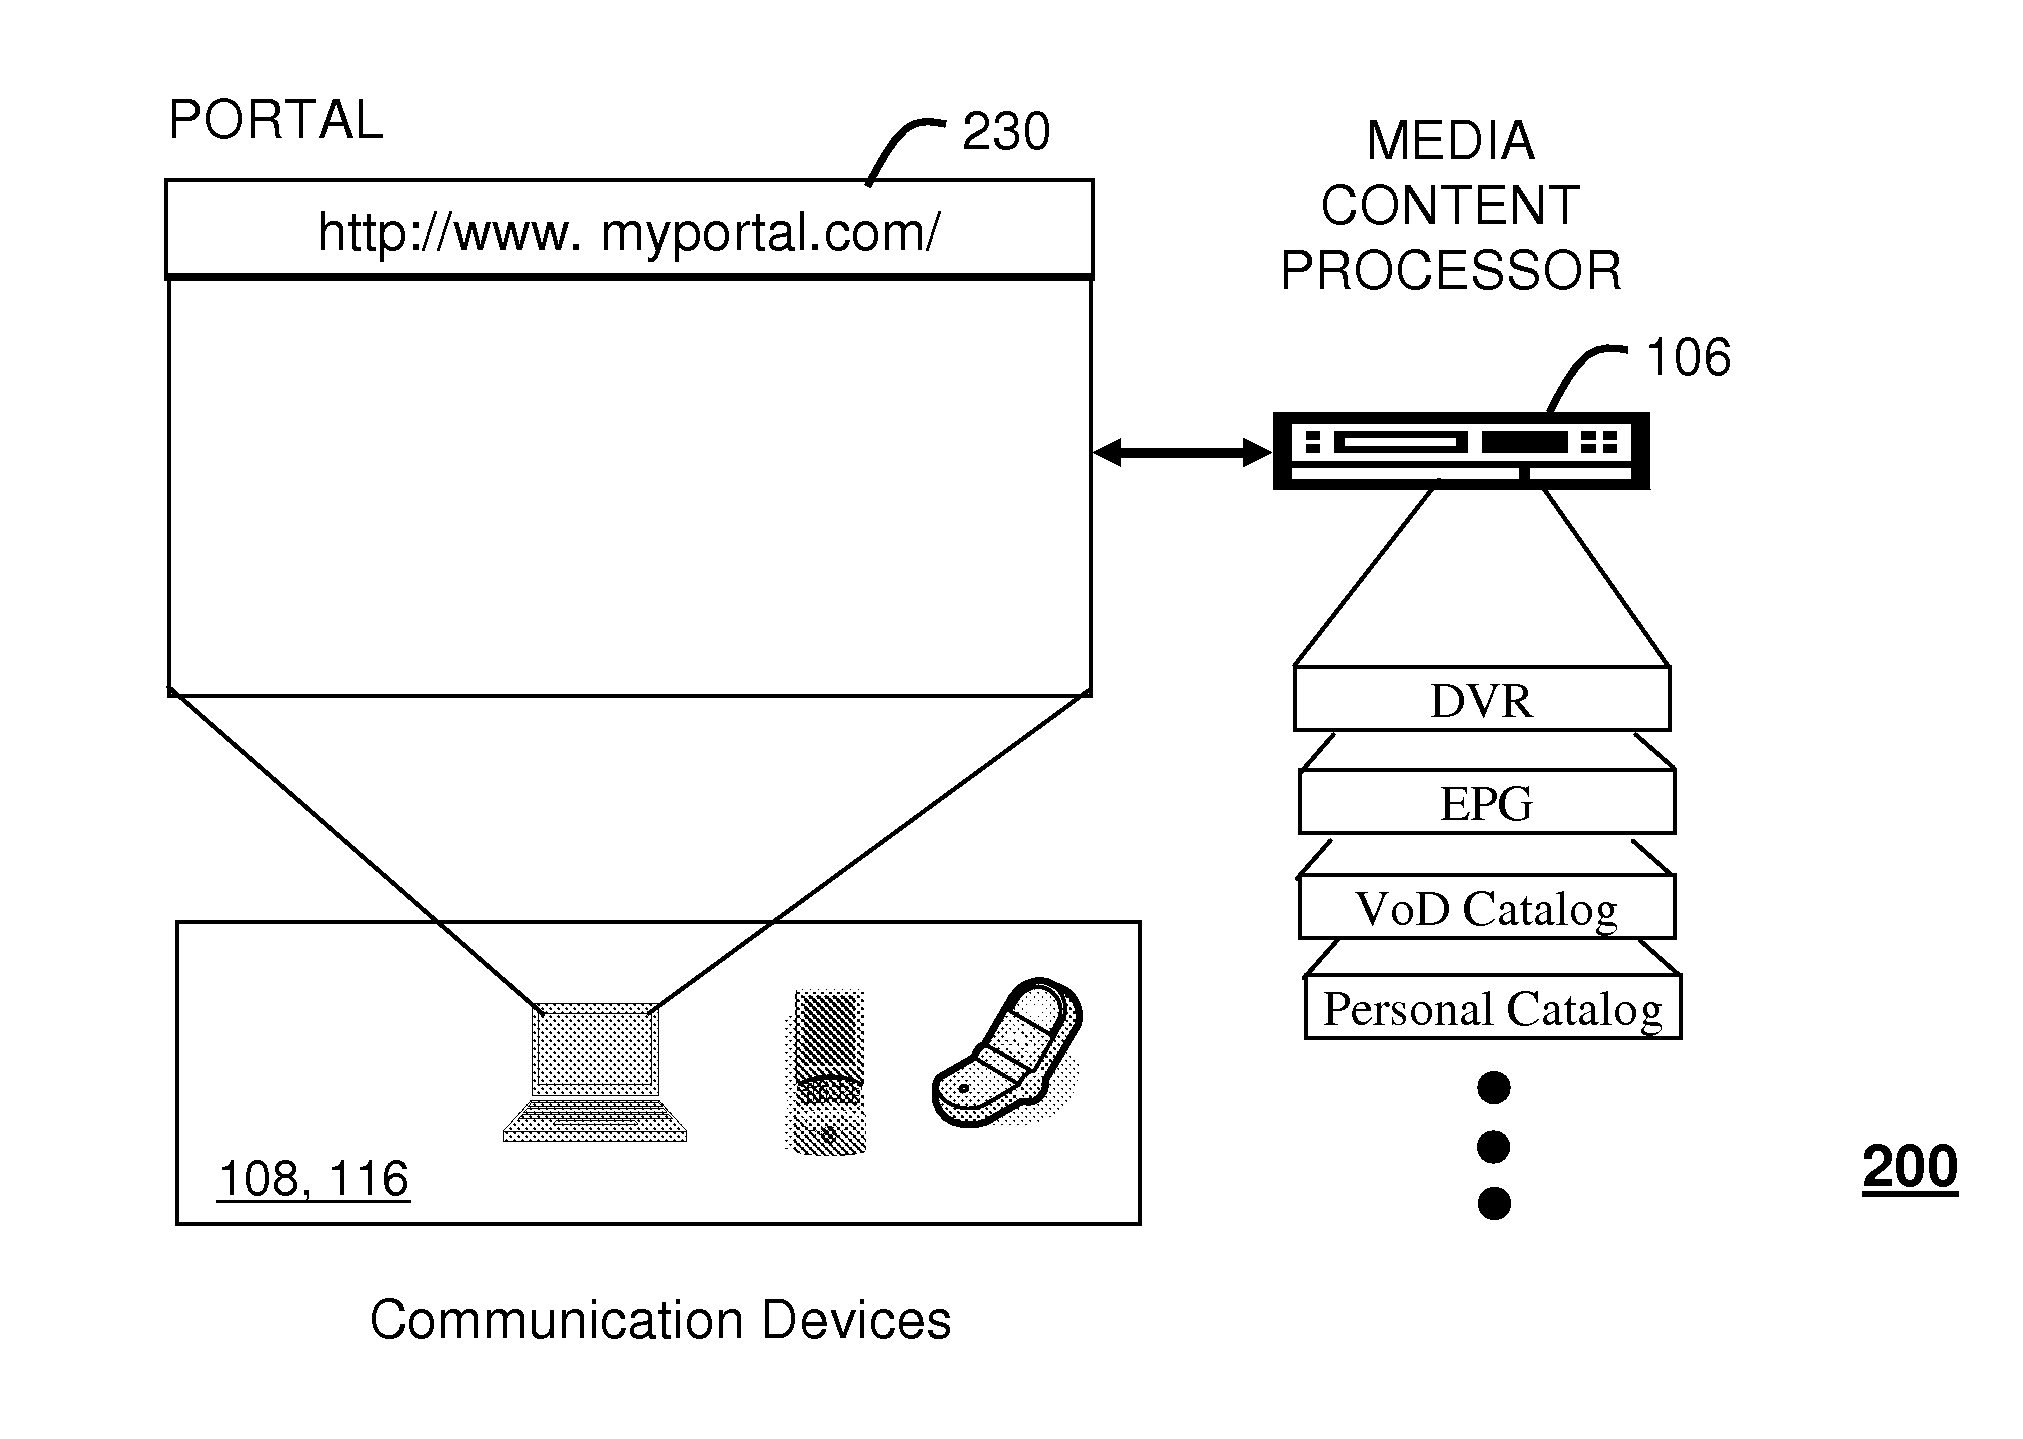 System for exchanging media content between a media content processor and a communication device